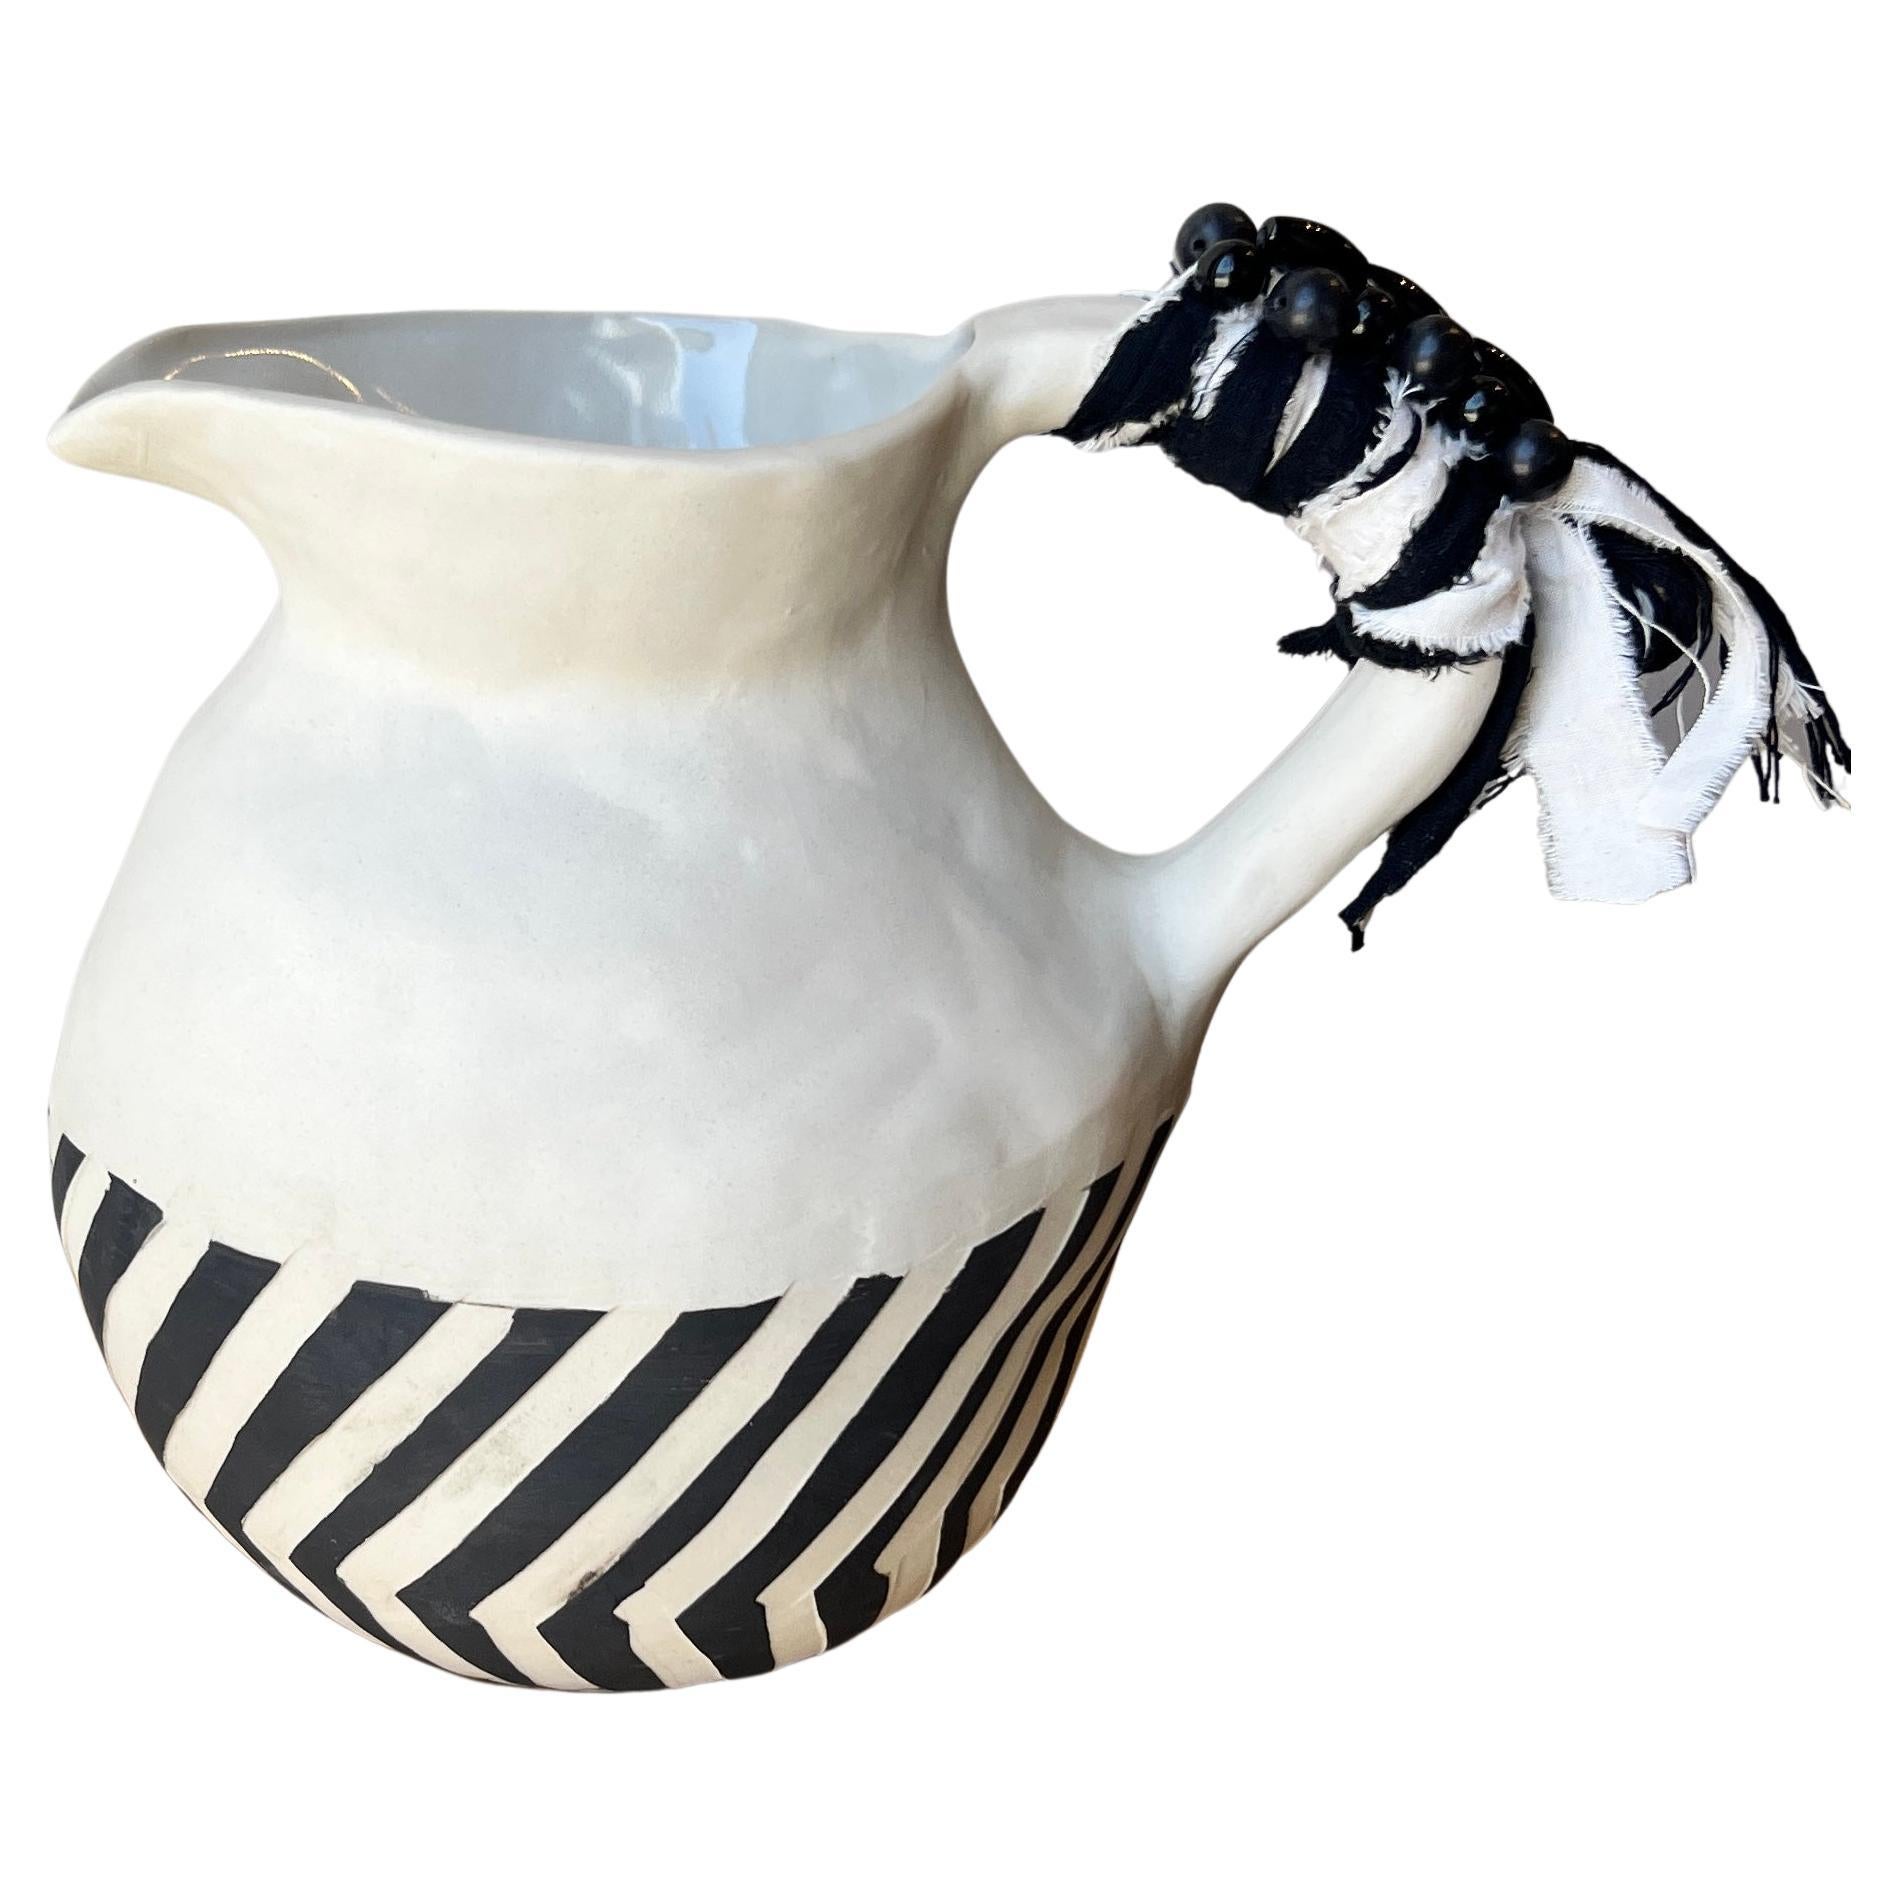 Striped Whimsical Handmade Ceramic Jug in Black and White with Fabric and Beads